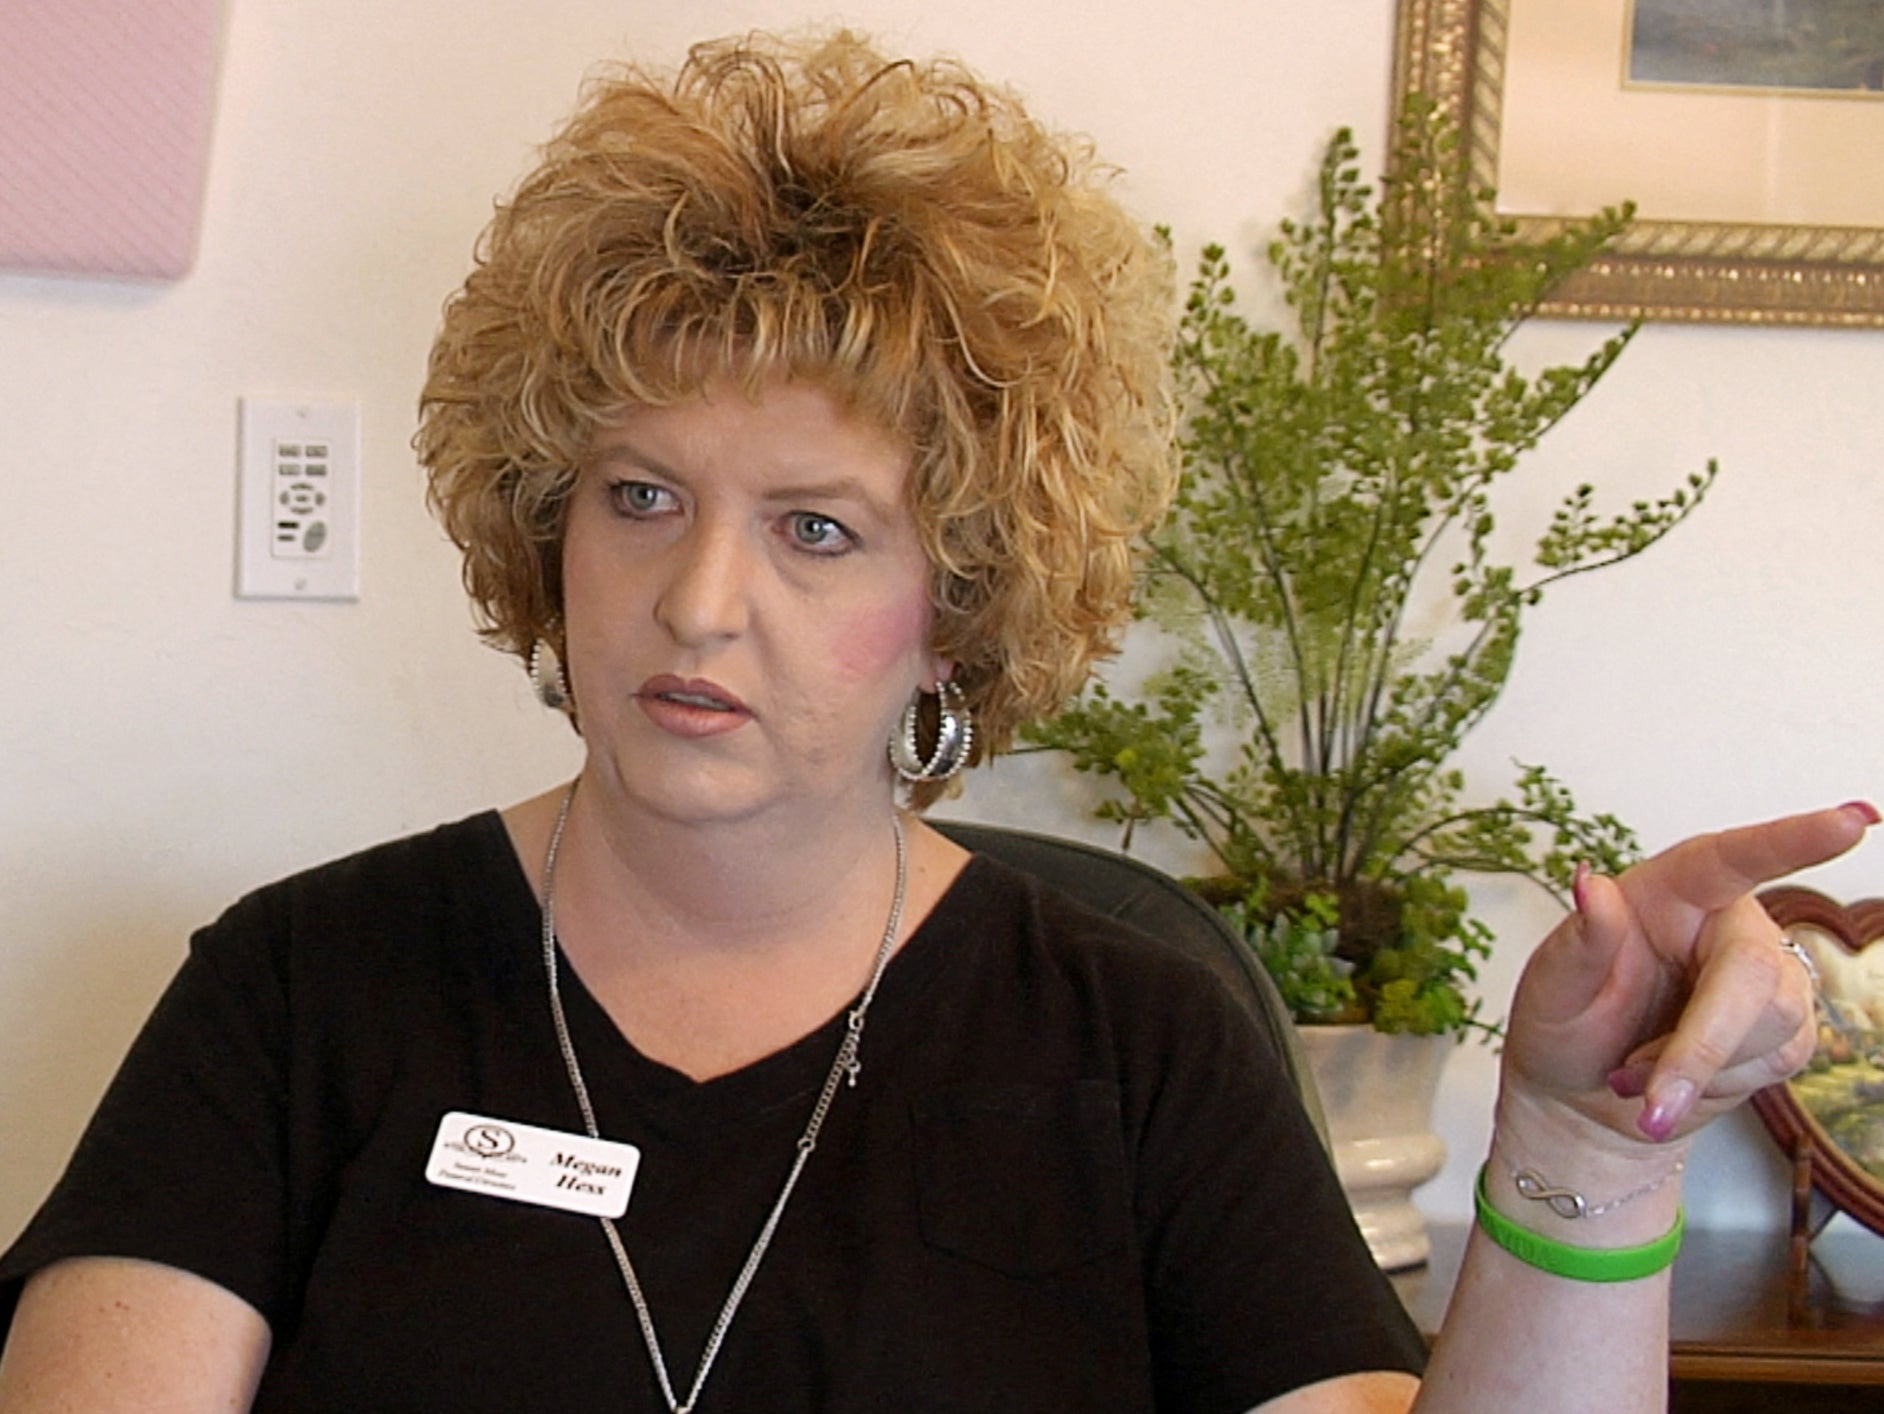 Megan Hess, owner of Donor Services, is pictured during an interview in Montrose, Colorado, U.S., May 23, 2016 in this still image from video